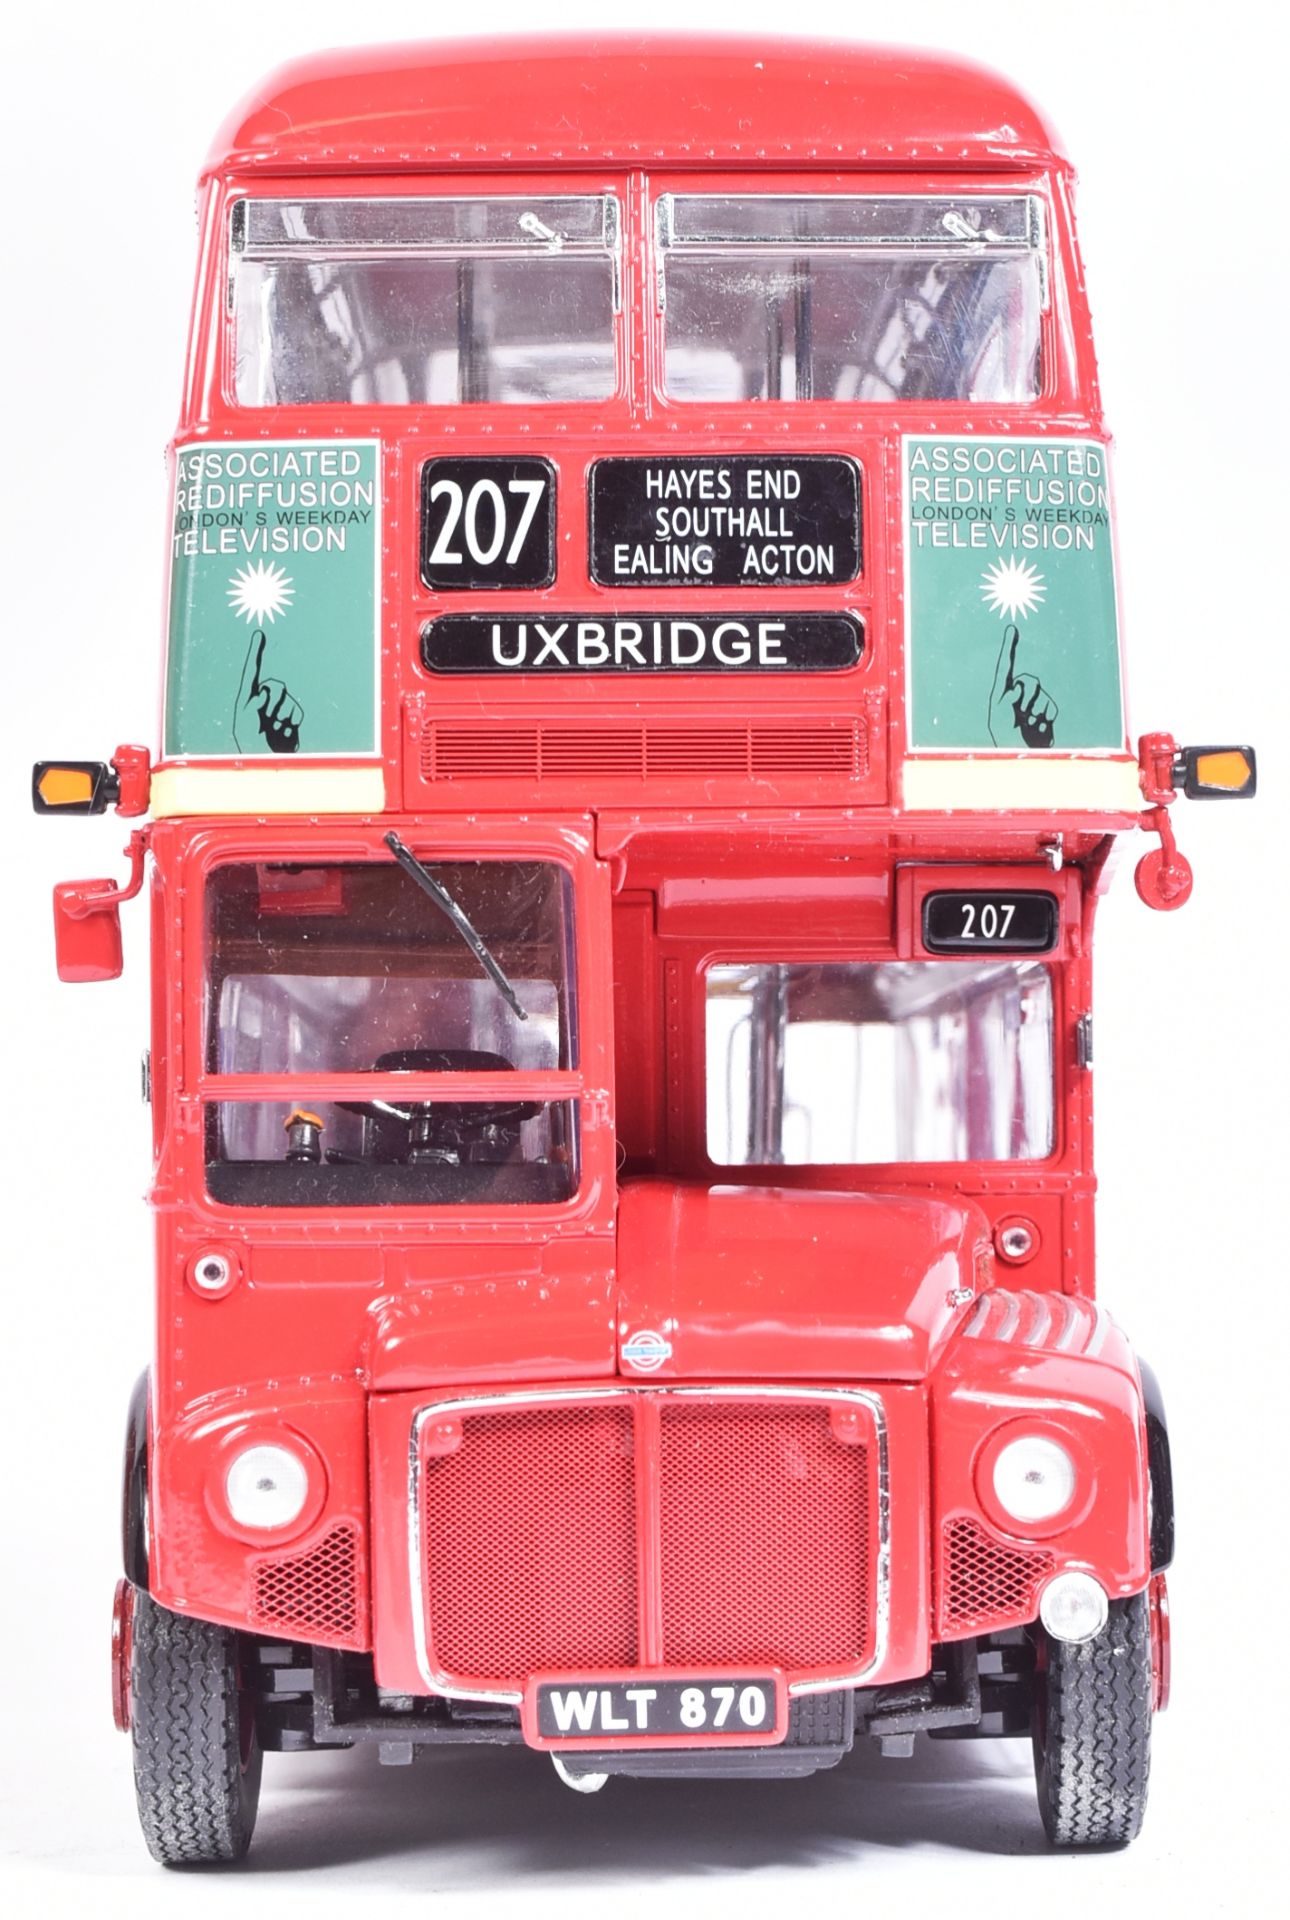 SUN STAR ROUTEMASTER DIECAST MODEL 1/24 SCALE - Image 3 of 5